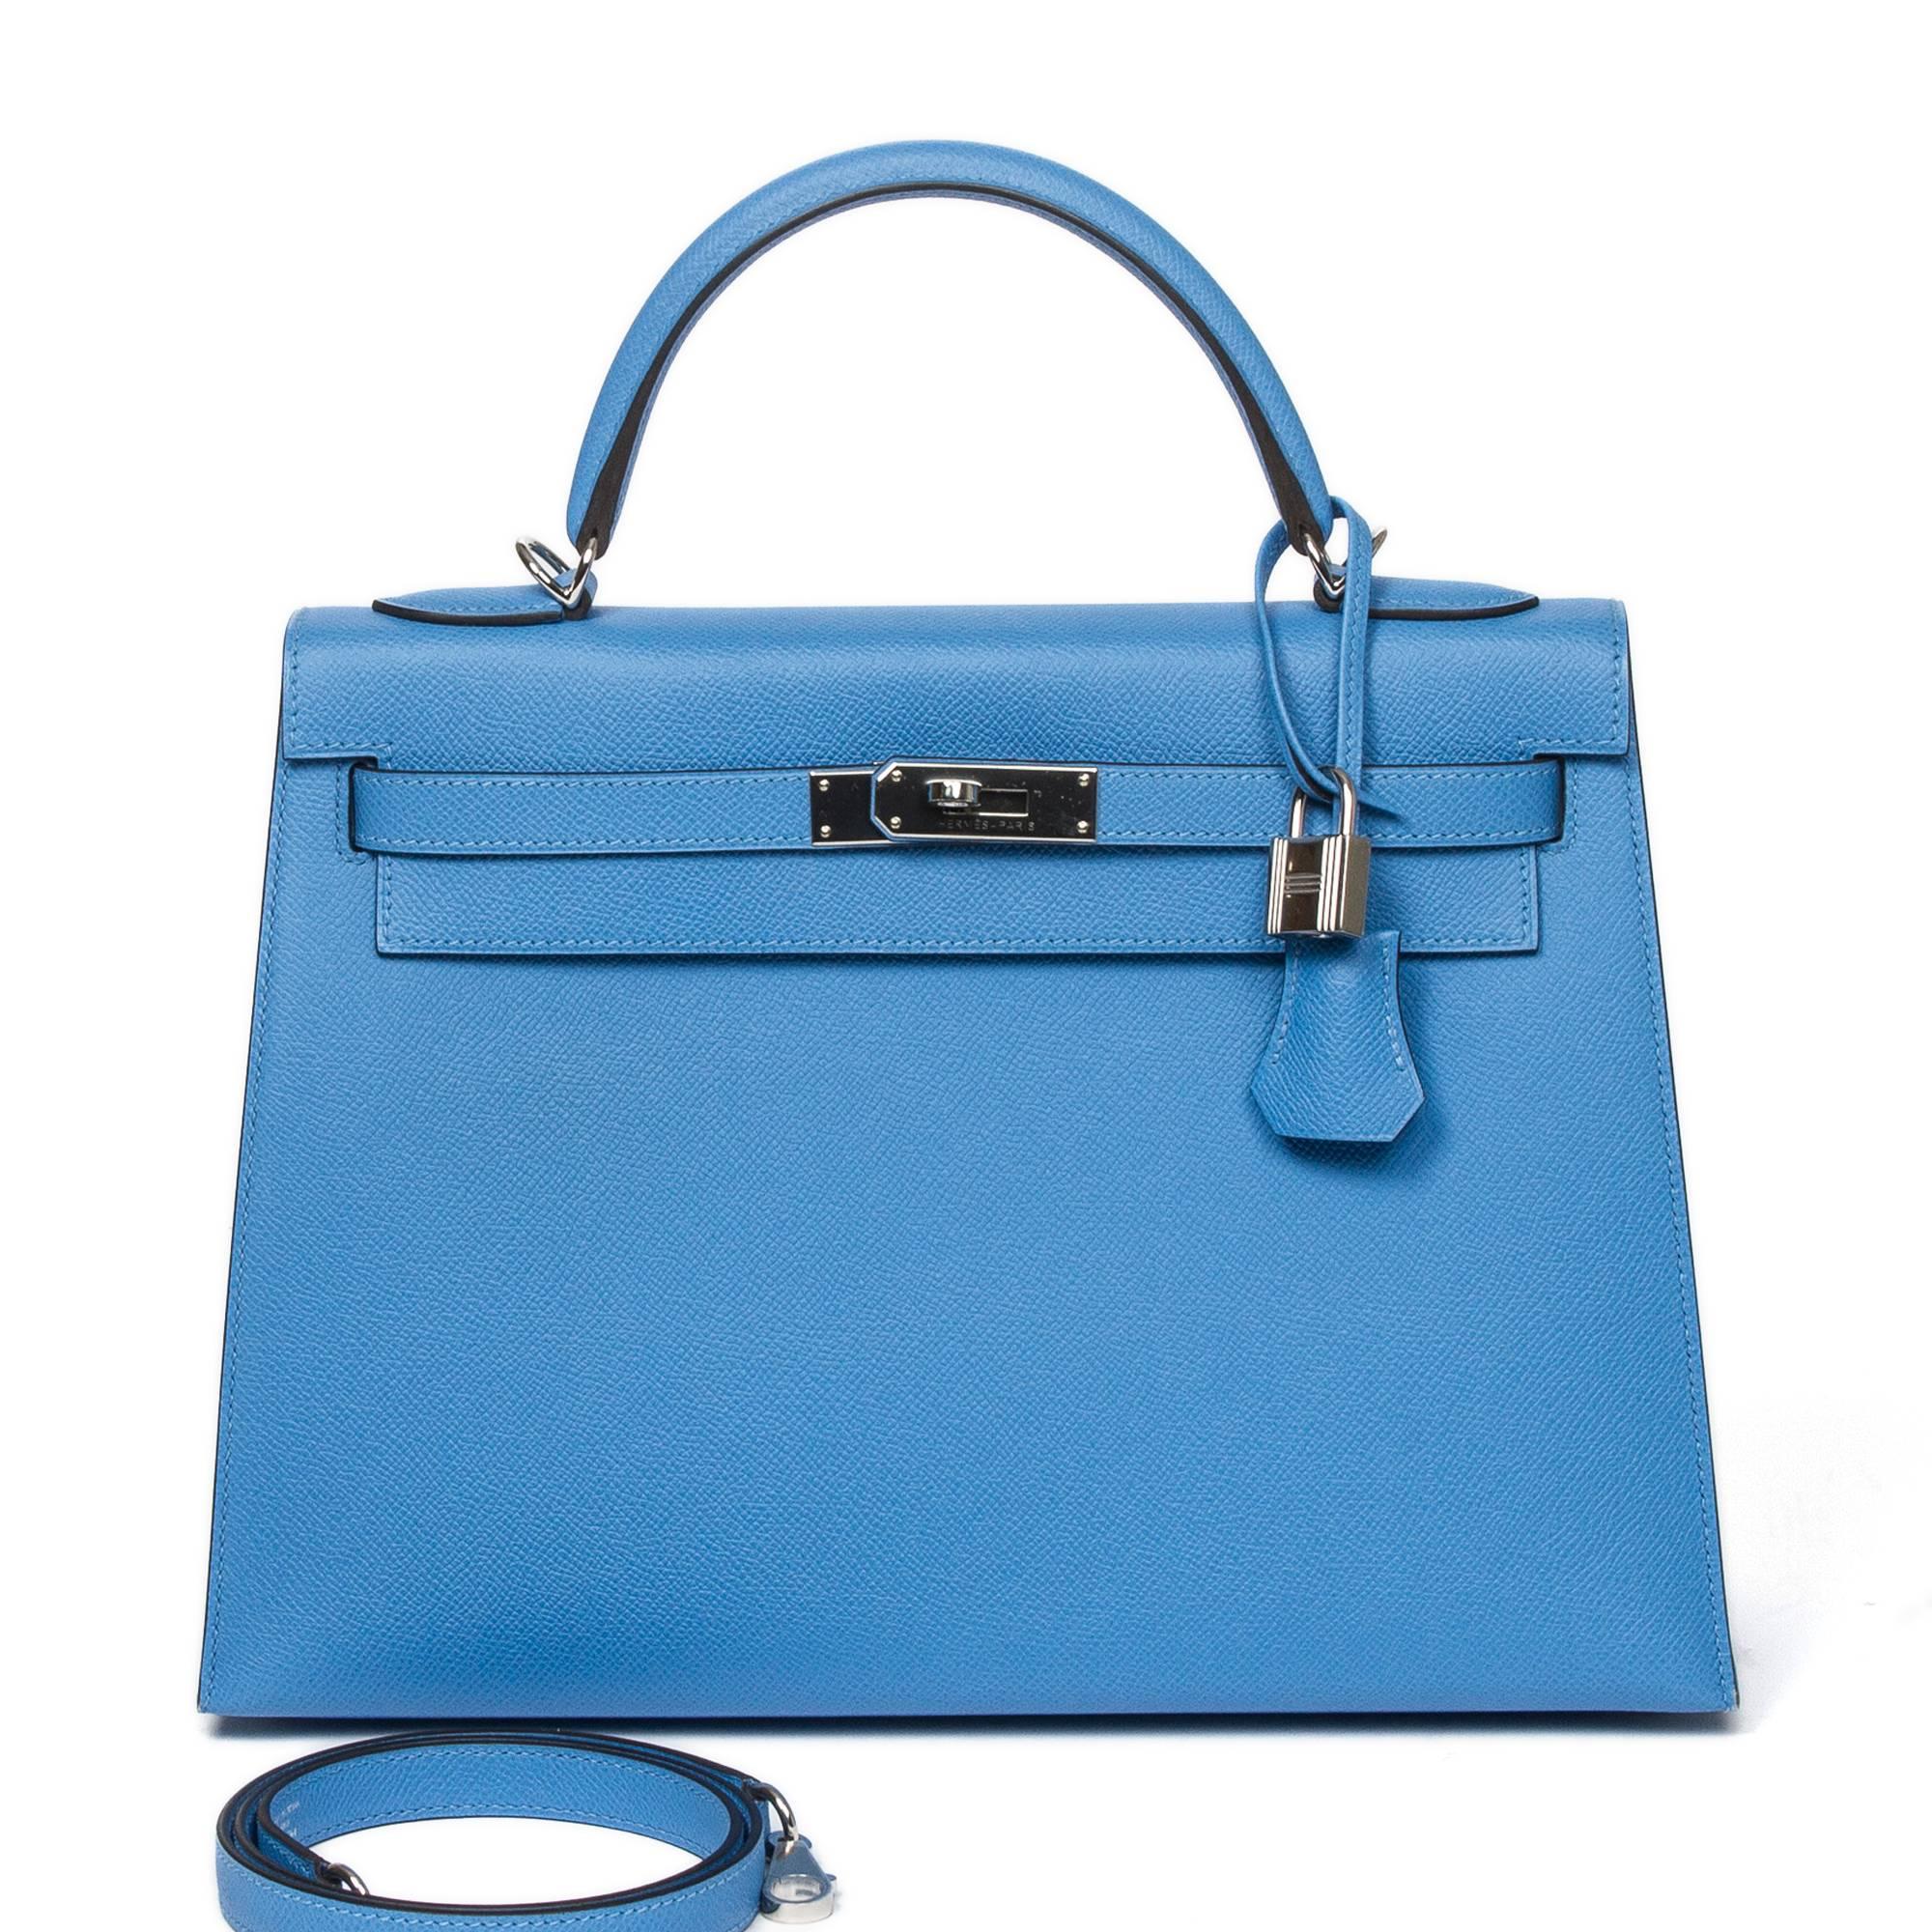 Kelly 32 in Blue Paradise Epsom leather with cadenas and keys in clochette, silver tone hardware. Blue Paradise chèvre leather lined interior with 2 slip pockets and one zip pocket. Stamp T. Model from 2016. Box, dustbag, pouch for accessories and